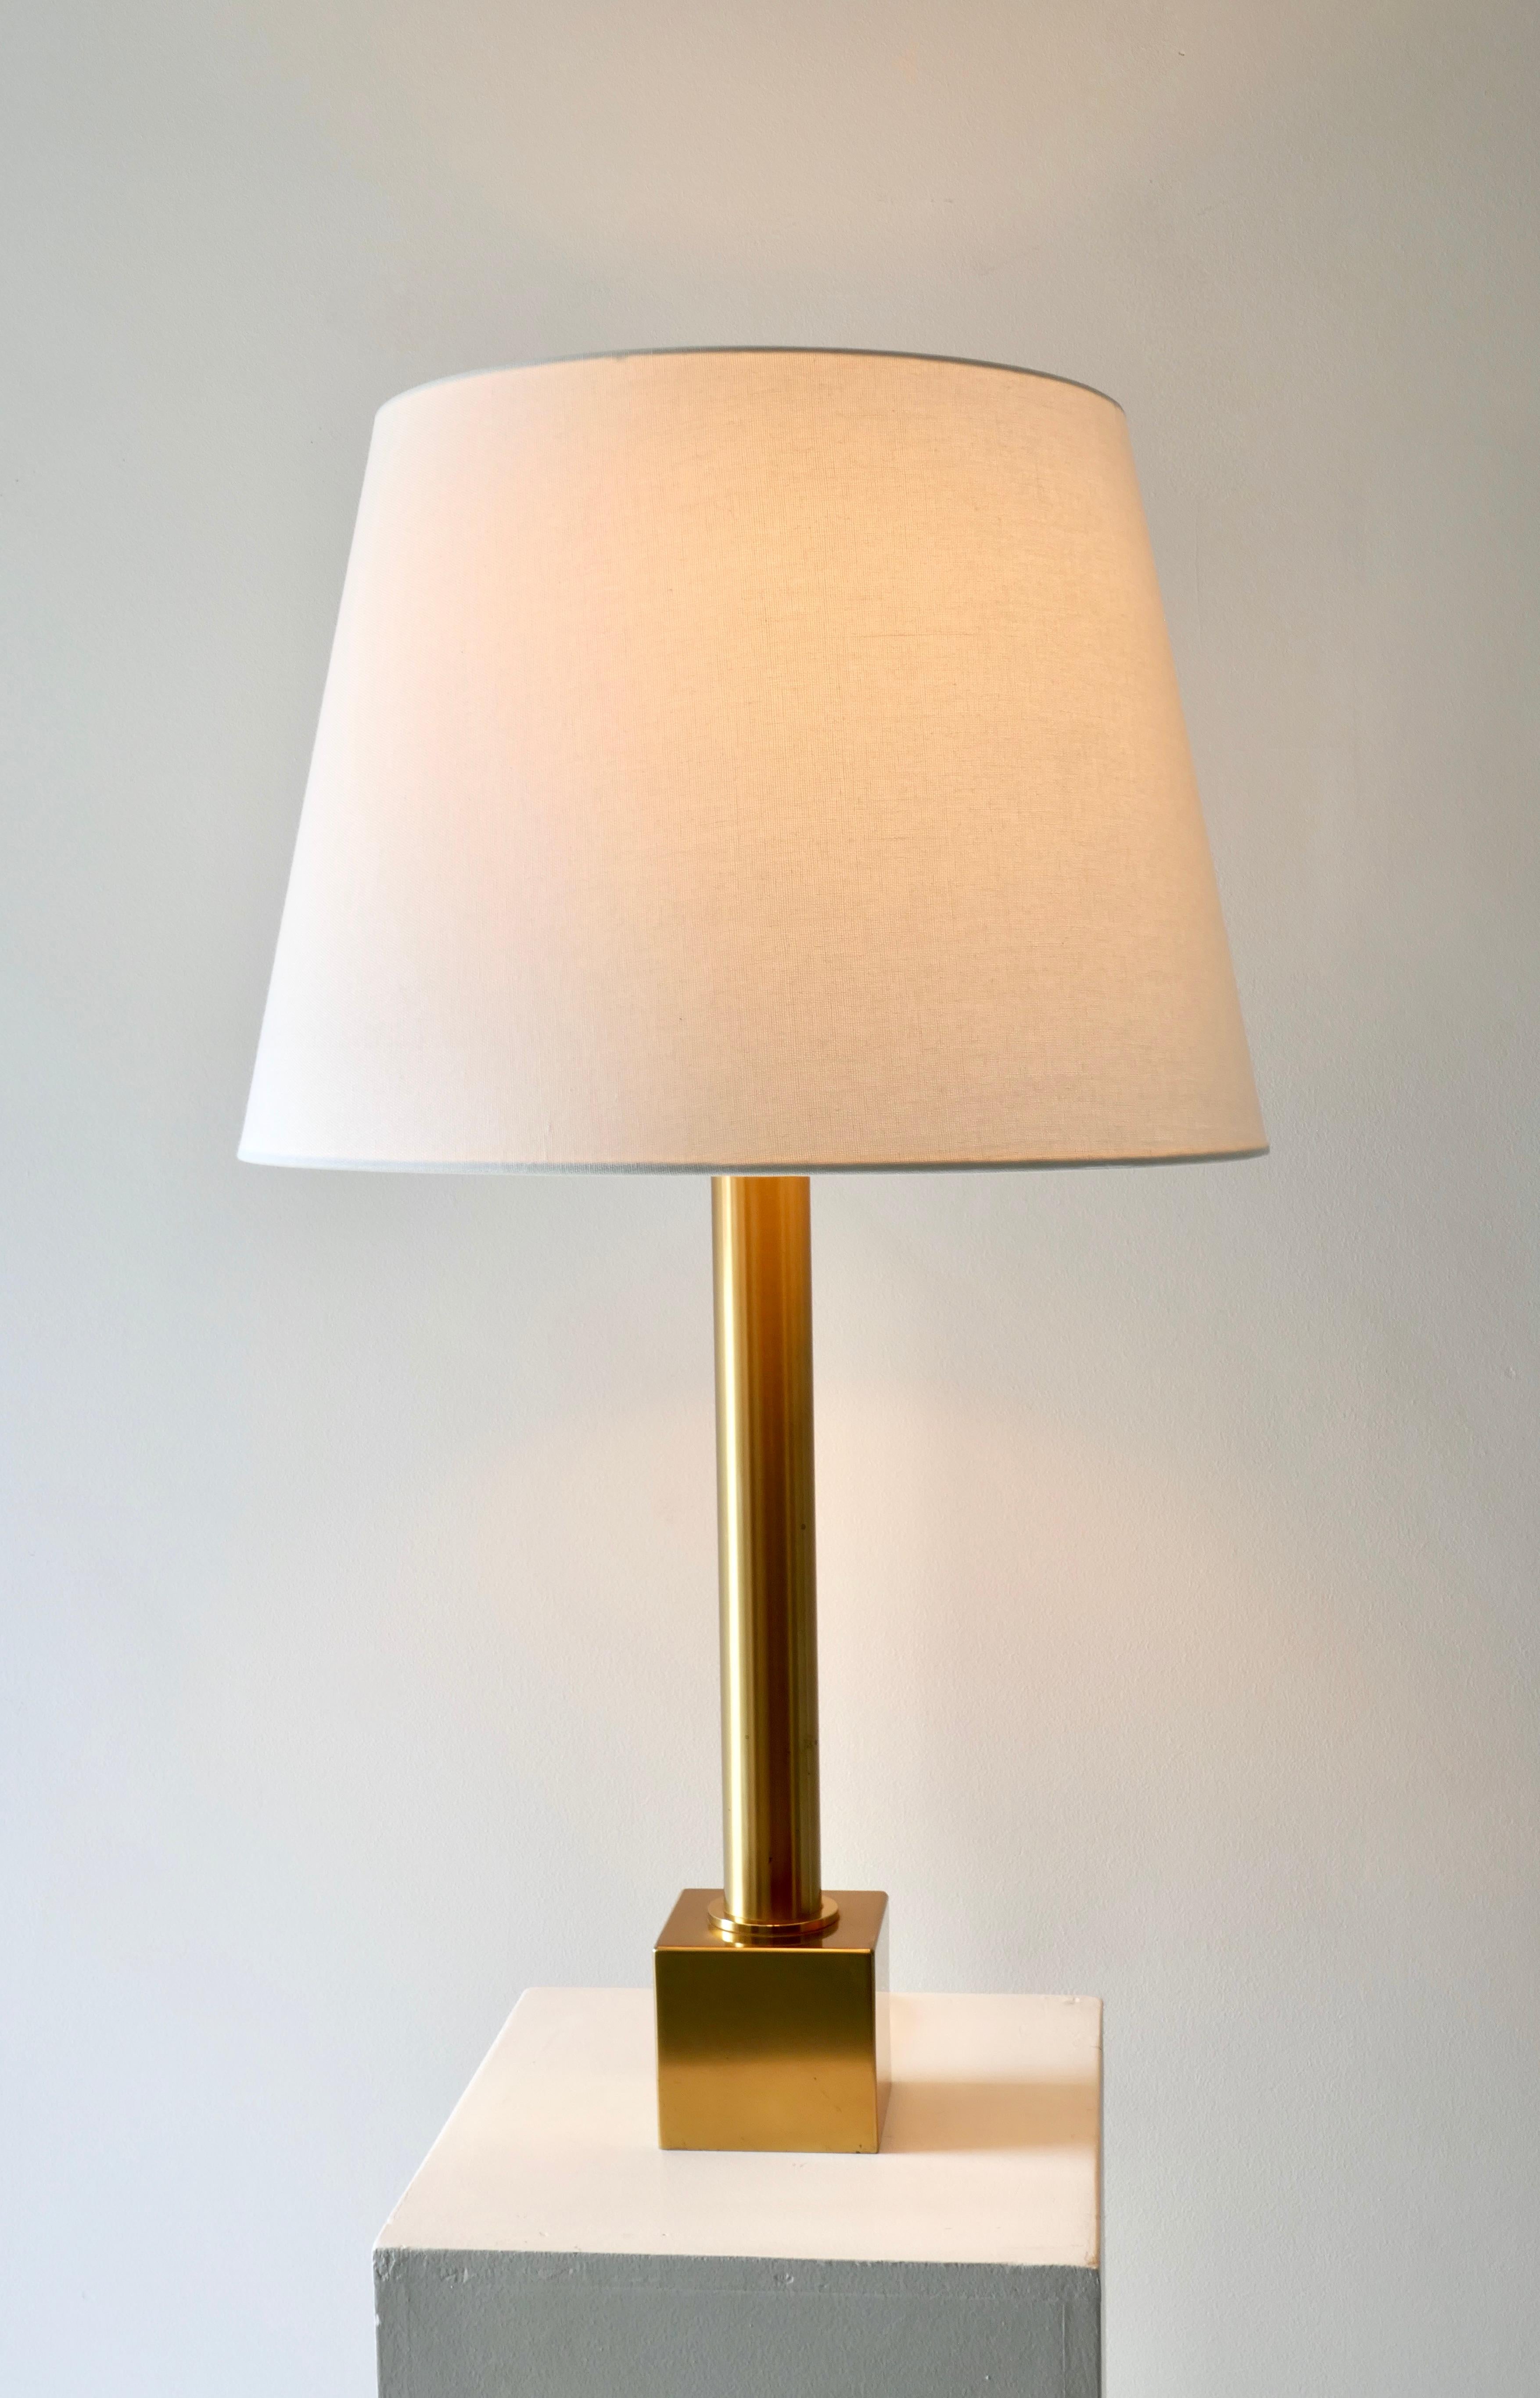 Late 20th Century Large Brass Table Lamp with White Lamp Shade, Germany, 1970s For Sale